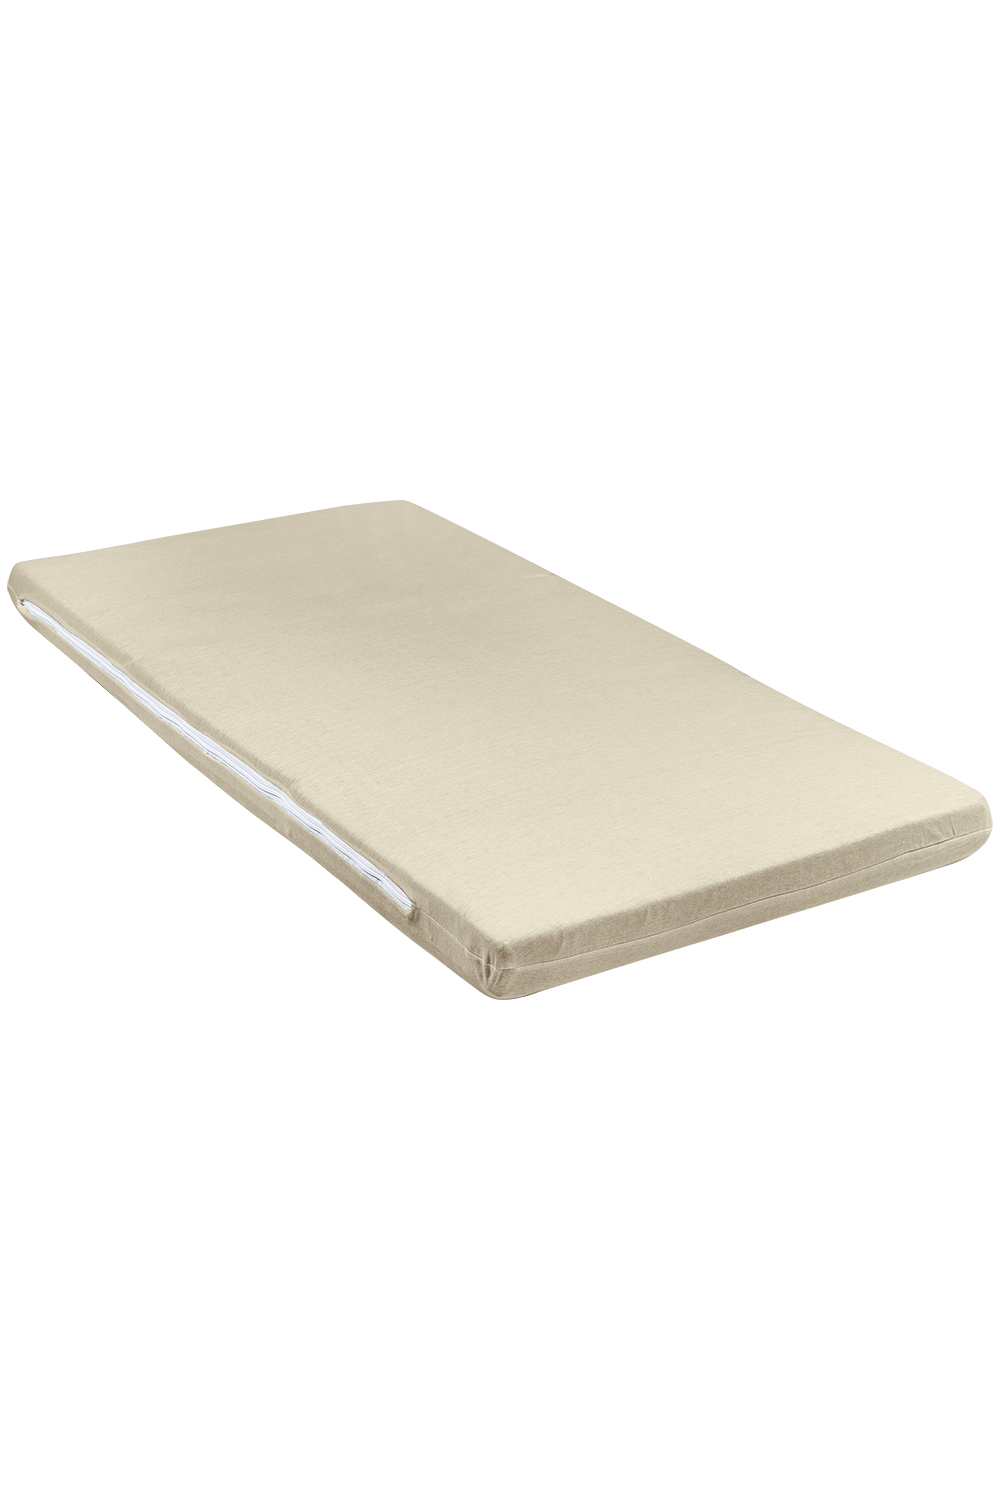 Jersey Campingbed Matrashoes DeLuxe - Sand - 60x120cm 